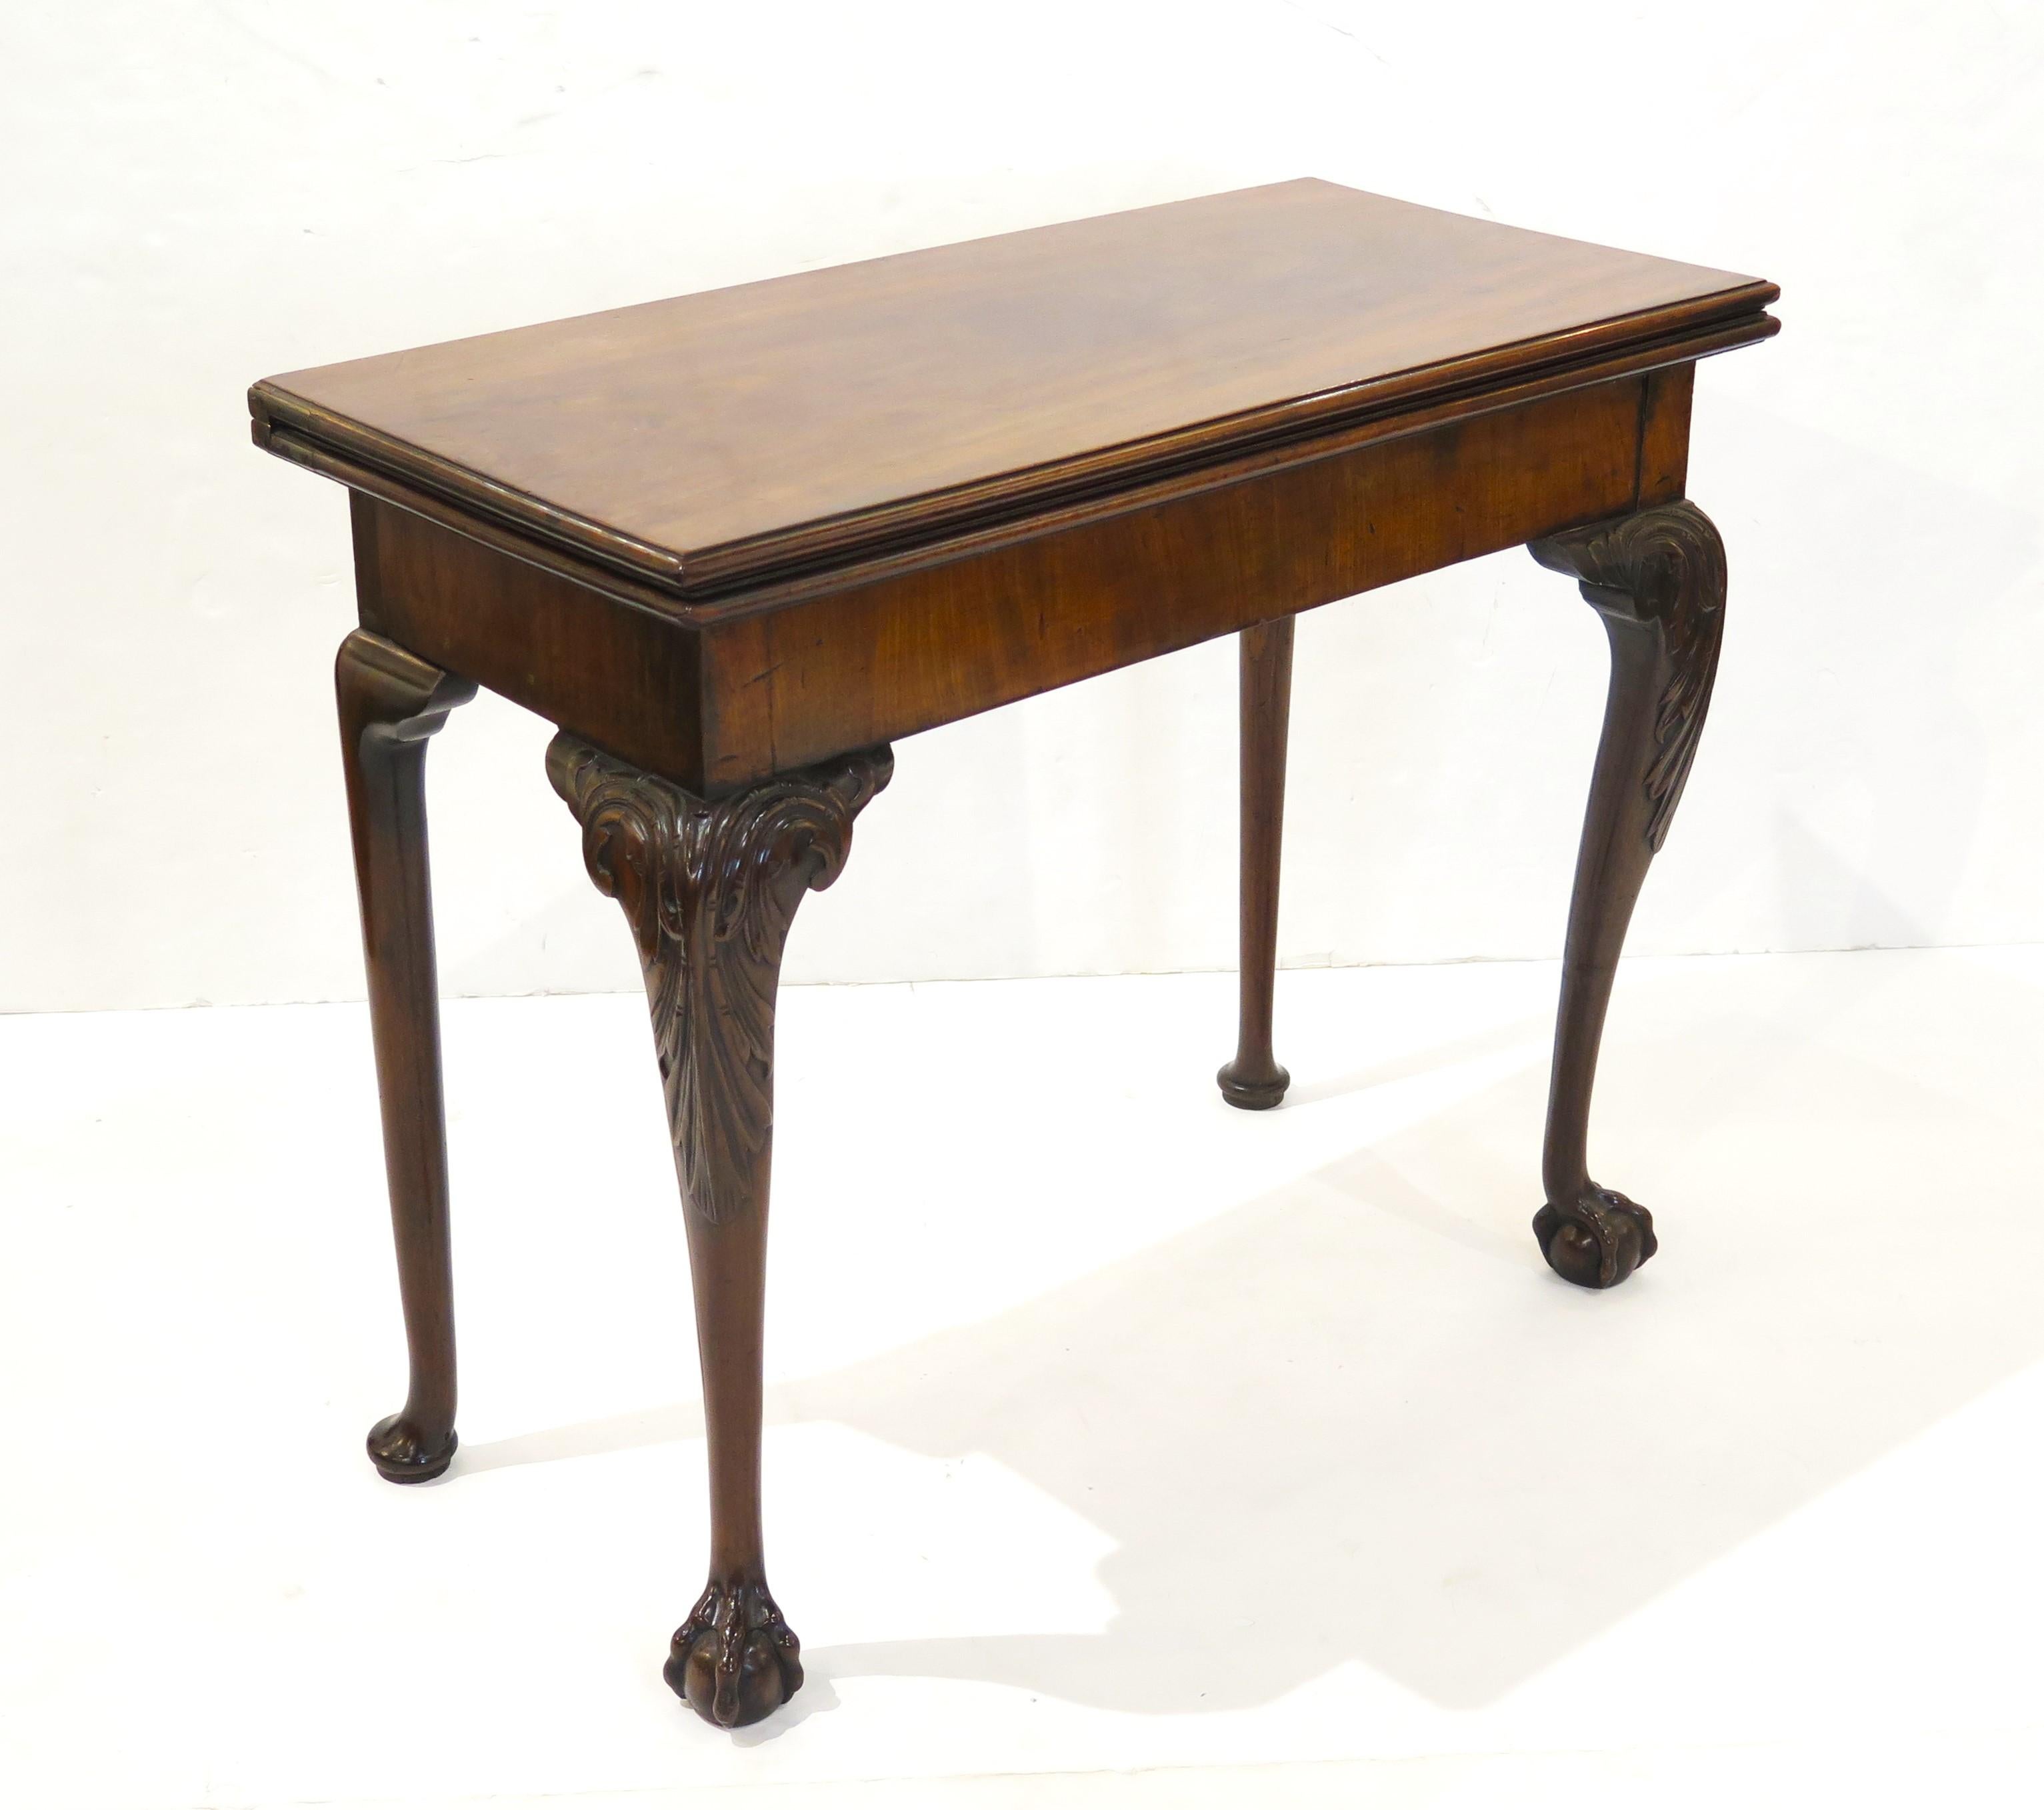 George II mahogany games / tea table with elegant hand-carved cabriole legs with beautiful carved knees and ball and claw feet (front legs), hinged back legs (more plain with pad feet) fold out to support top, concertina action, sliding wood panel